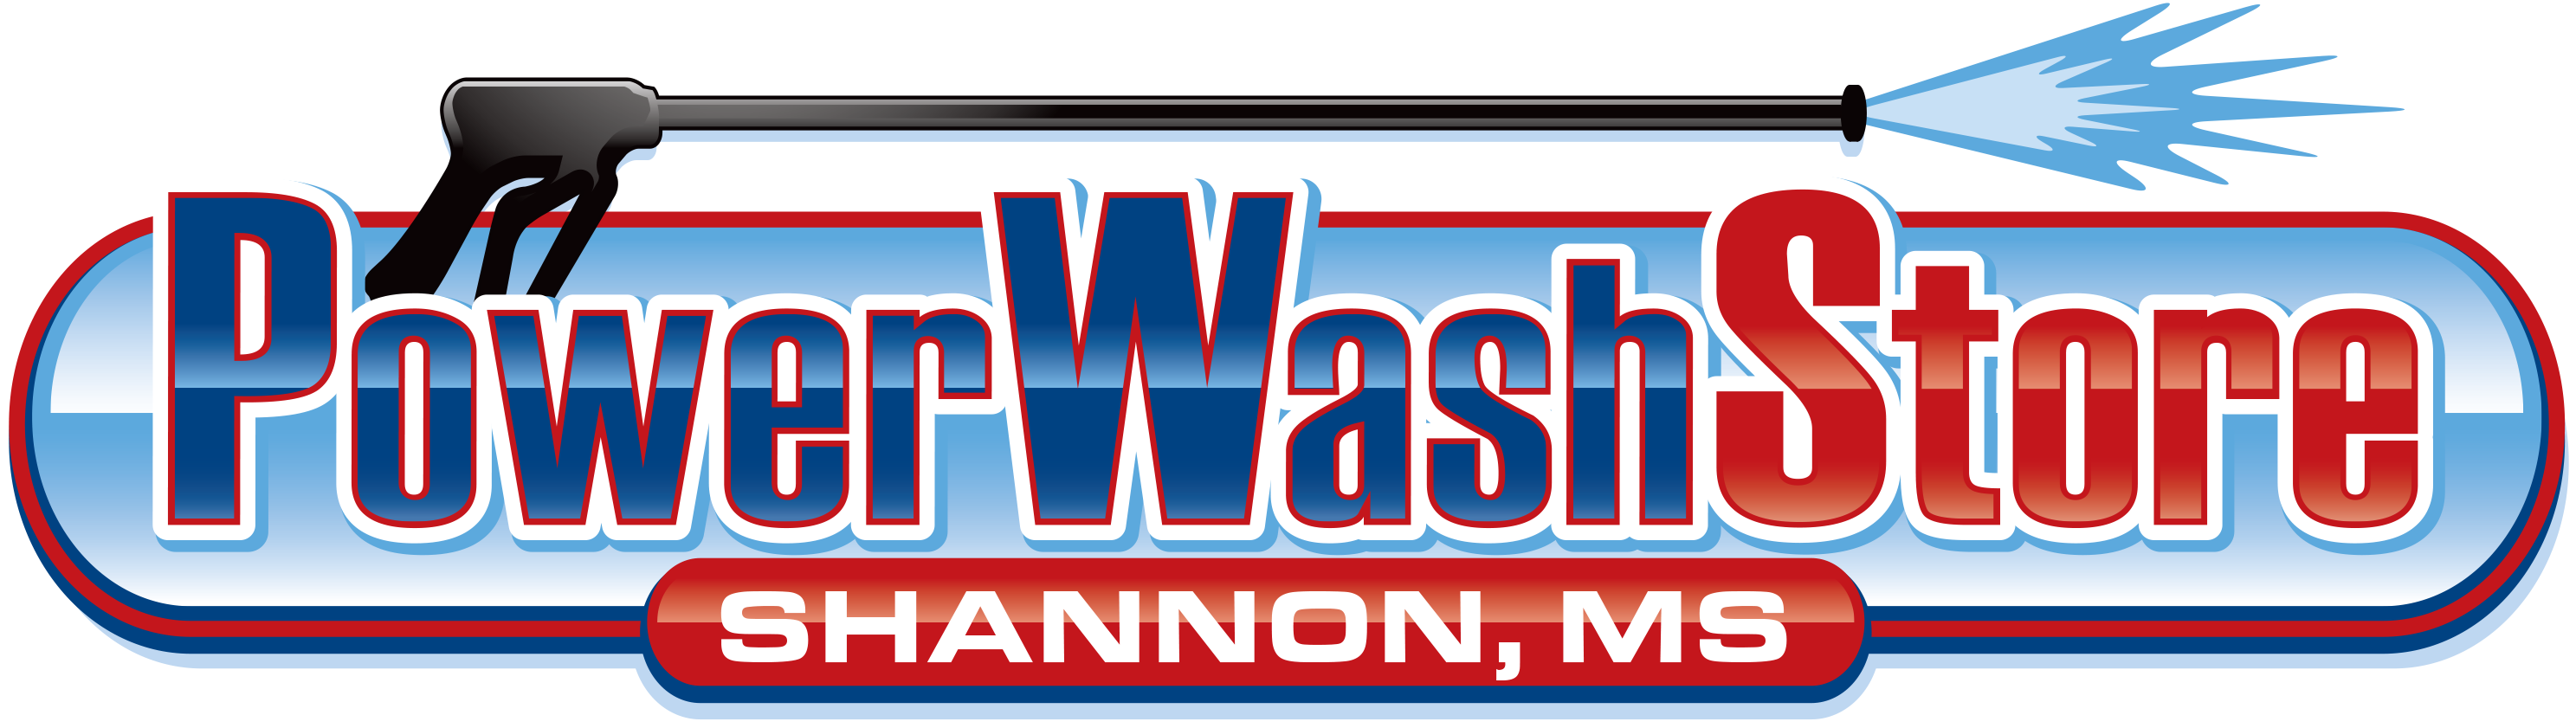 Power Wash Store of Shannon MS logo